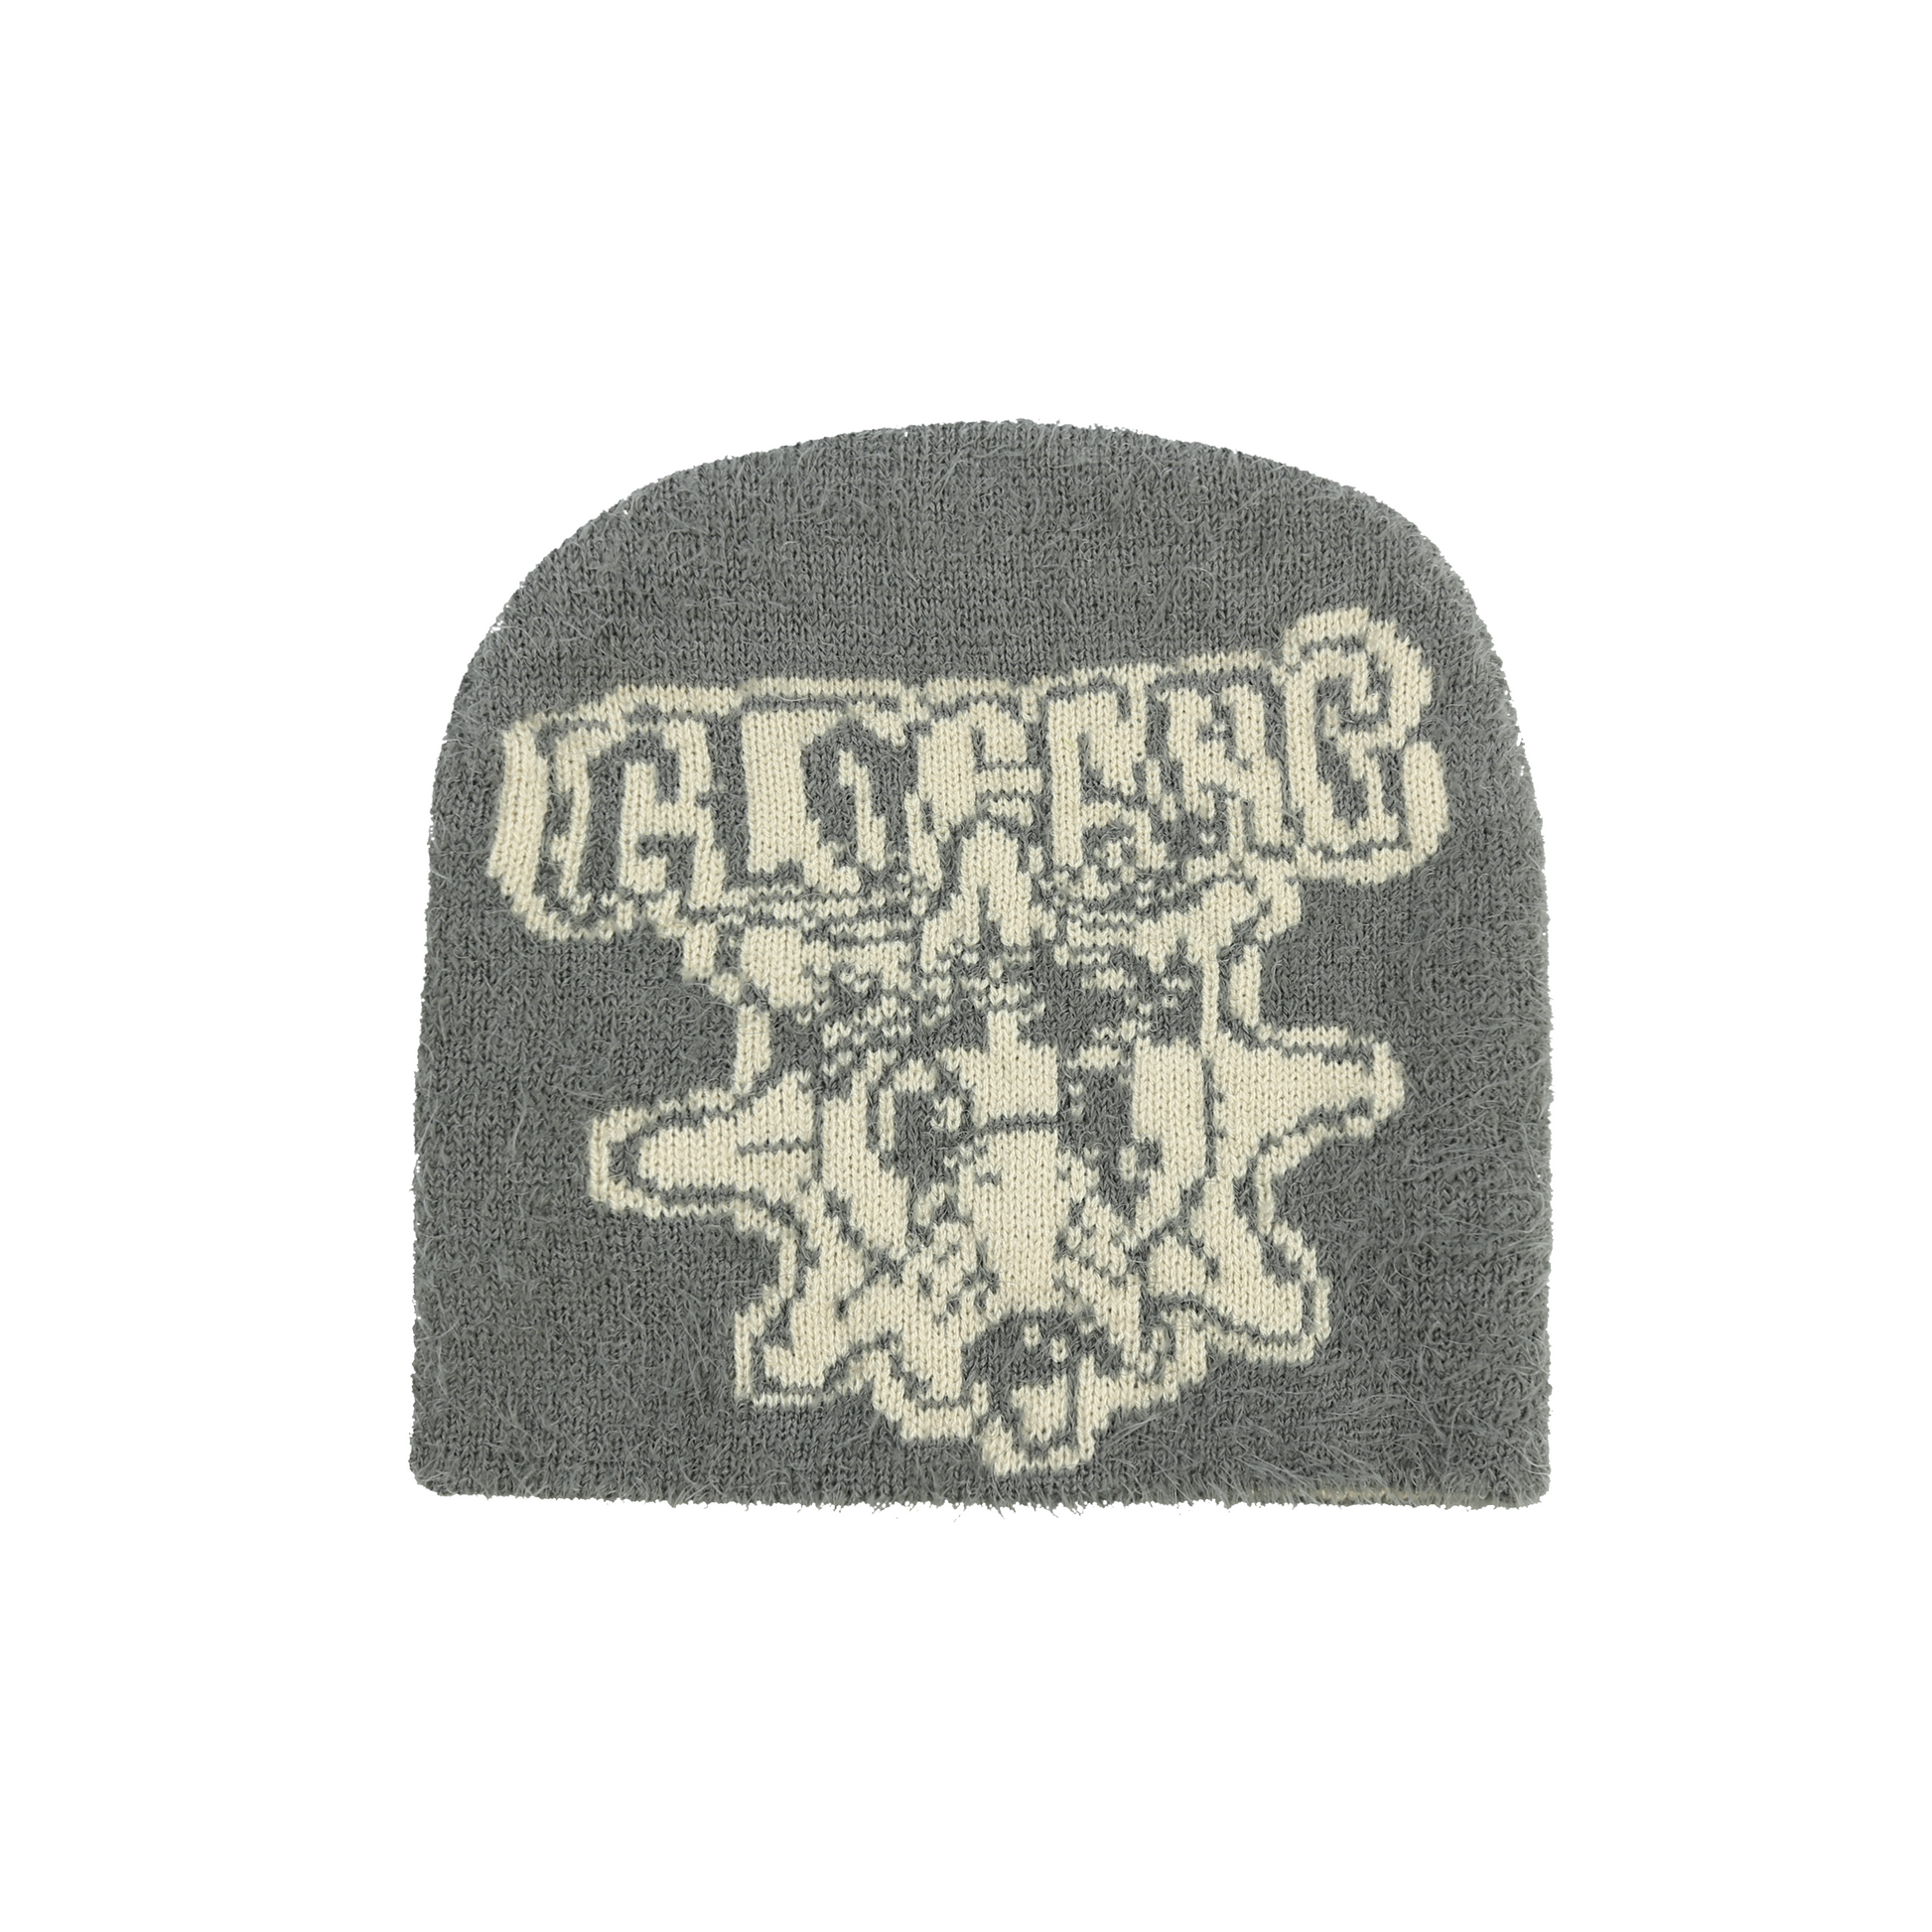 glo gang Almighty beanie (black)chiefkeef - ニットキャップ/ビーニー